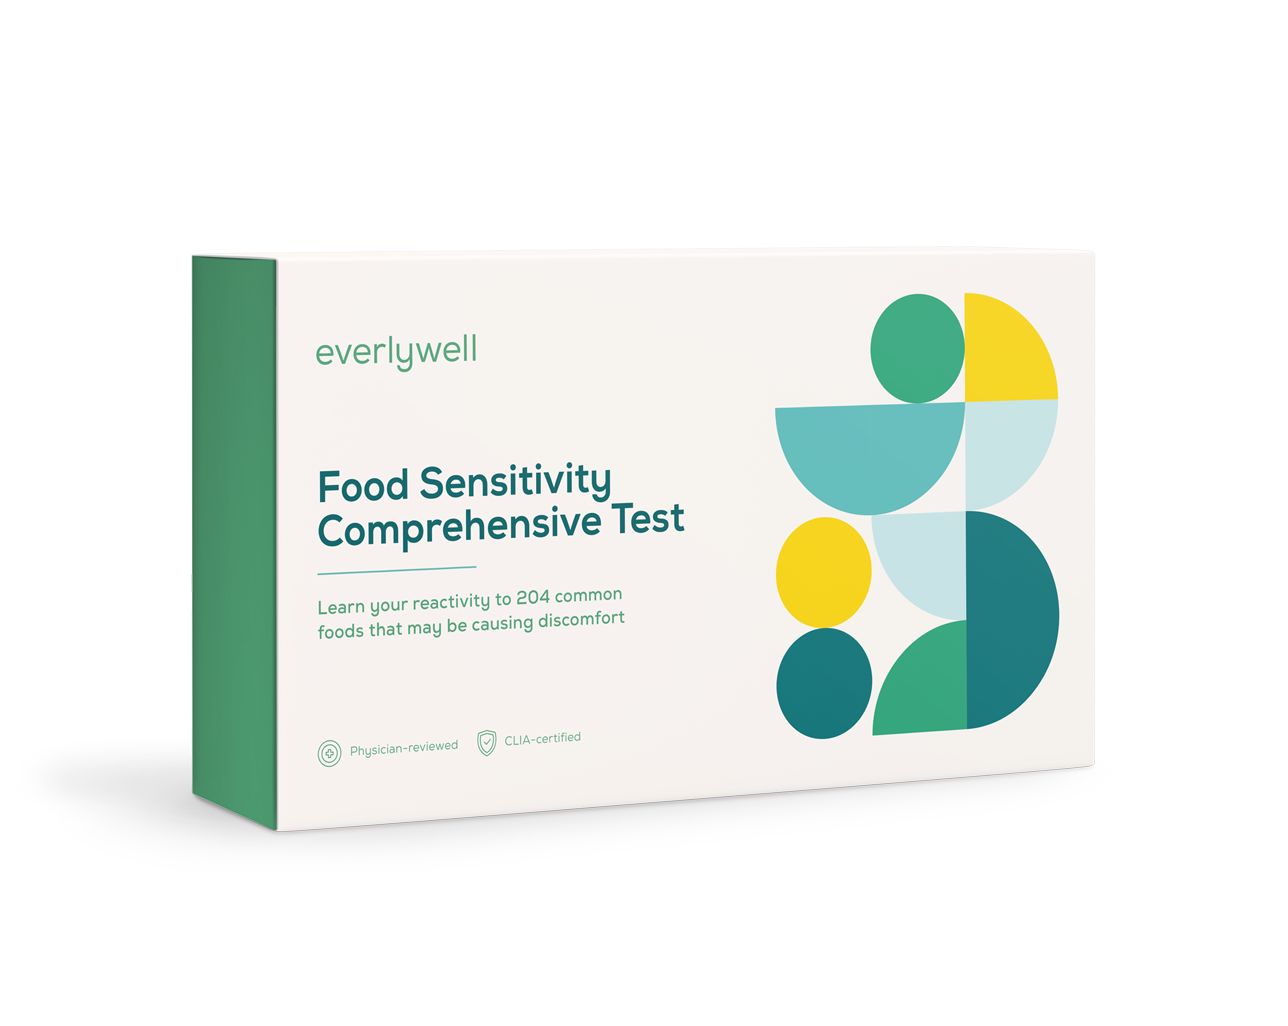 At Home Food Sensitivity Comprehensive Test - Easy to Use and Understand - Everlywell | EverlyWell